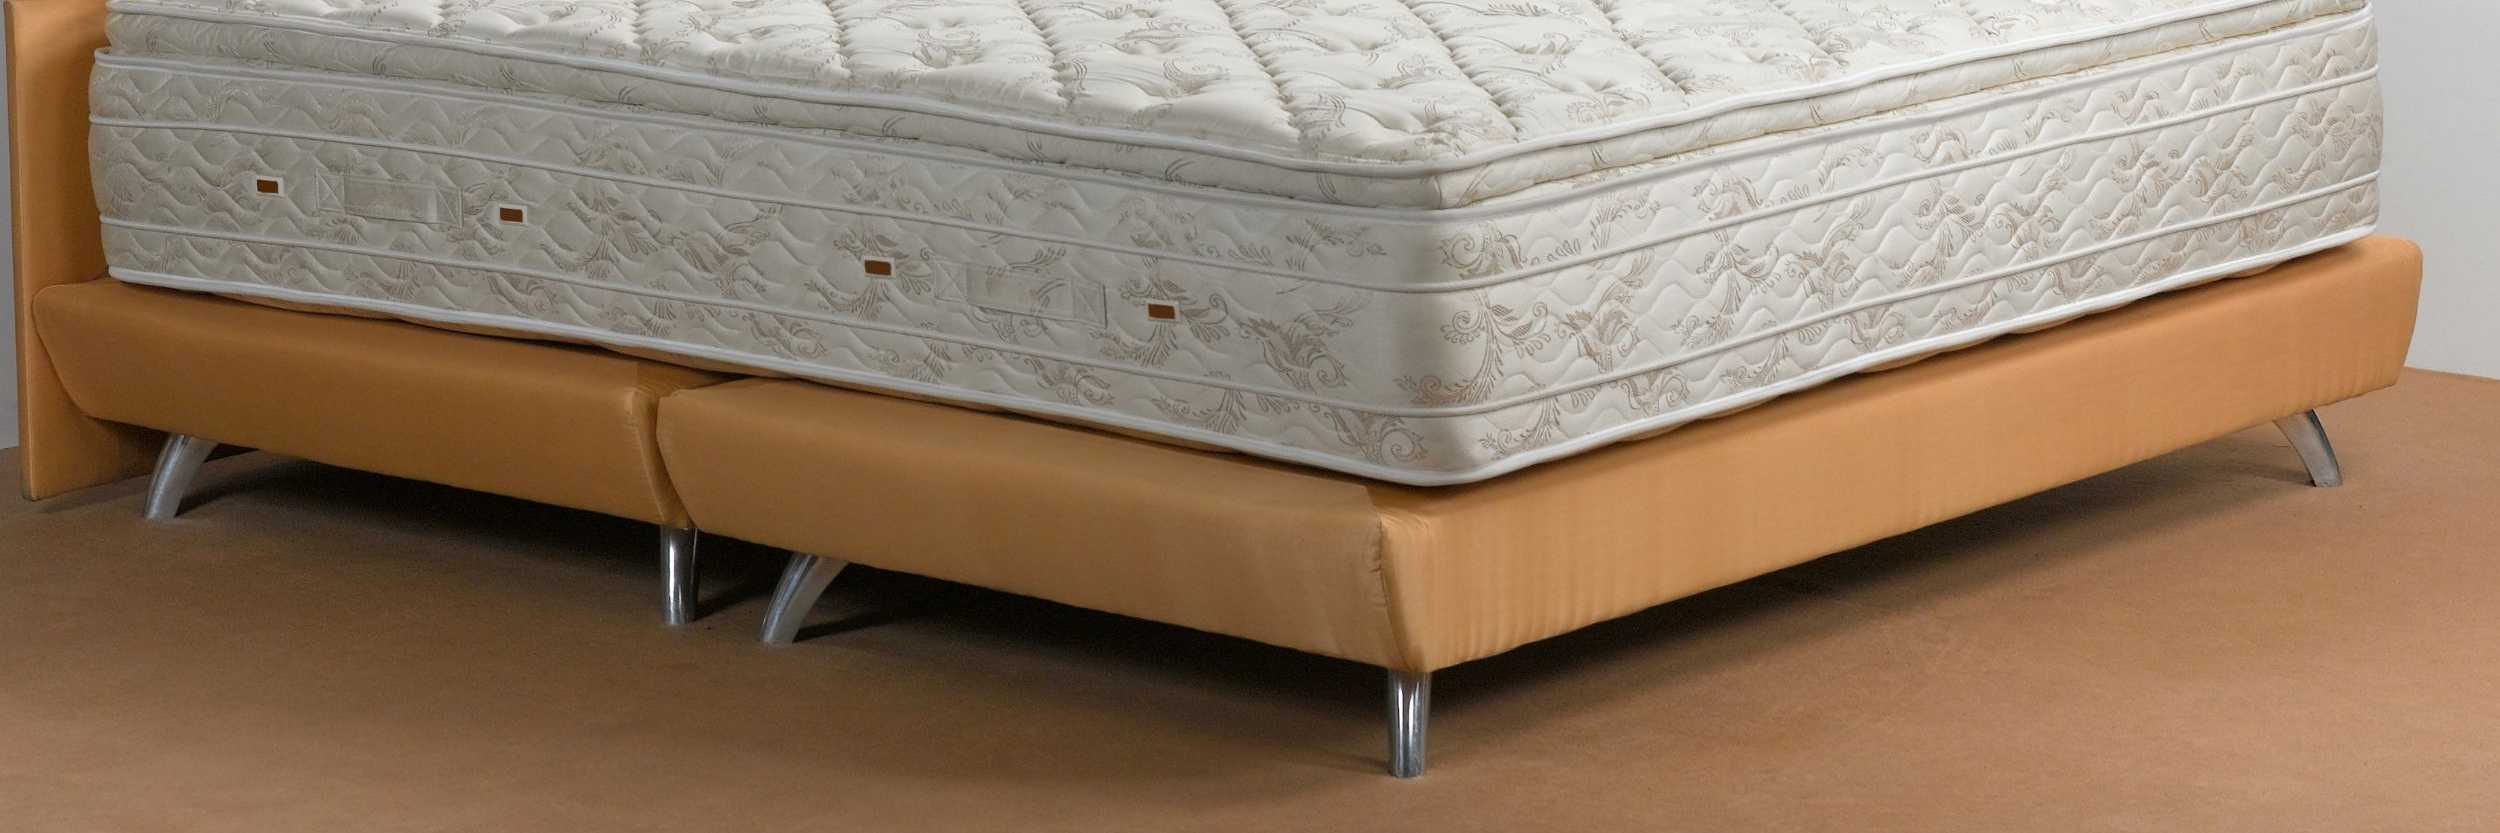 Best time to buy mattresses